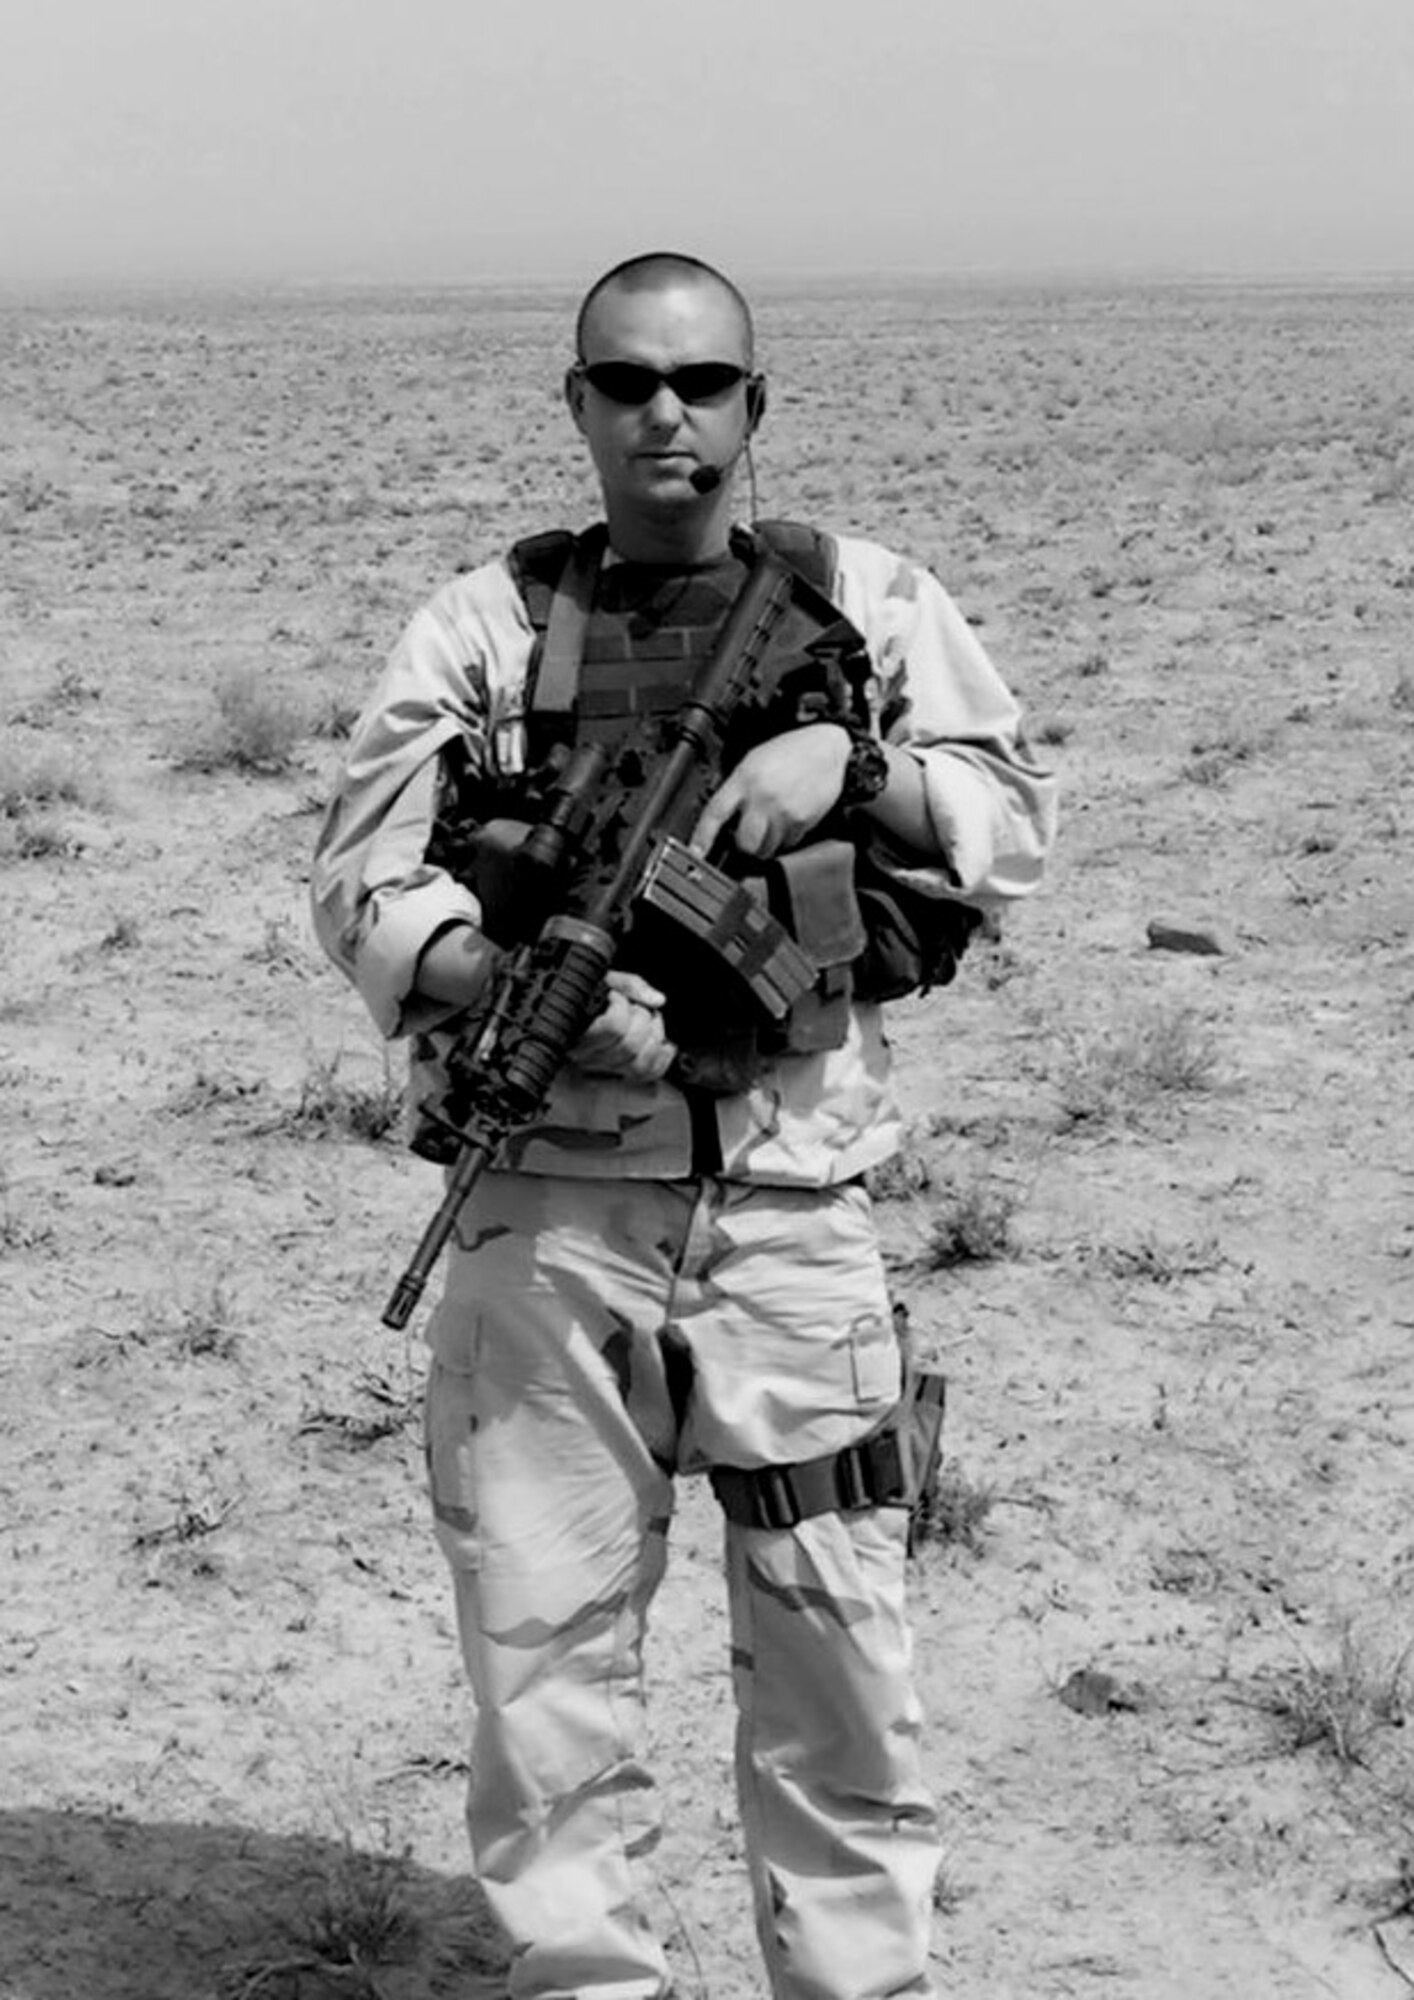 Only 20 minutes prior to the firefight Aug. 8, 2006 in Qalat Province, Afghanistan, Staff Sgt. Jason Kimberling had this photo taken of himself by a fellow Airman. Sergeant Kimberling was awarded a Bronze Star with valor and an Army Commendation Medal at Mountain Home Air Force Base, Idaho, July 19 for his actions in Afghanistan. Sergeant Kimberling was one of only three Americans in a coalition tasking with the Afghan national police and Army that was attacked. His actions prevented the entire coalition force from being split up during an ambush. Sergeant Kimberling is assigned to the 366th Security Forces Squadron at Mountain Home AFB. (Courtesy photo) 
